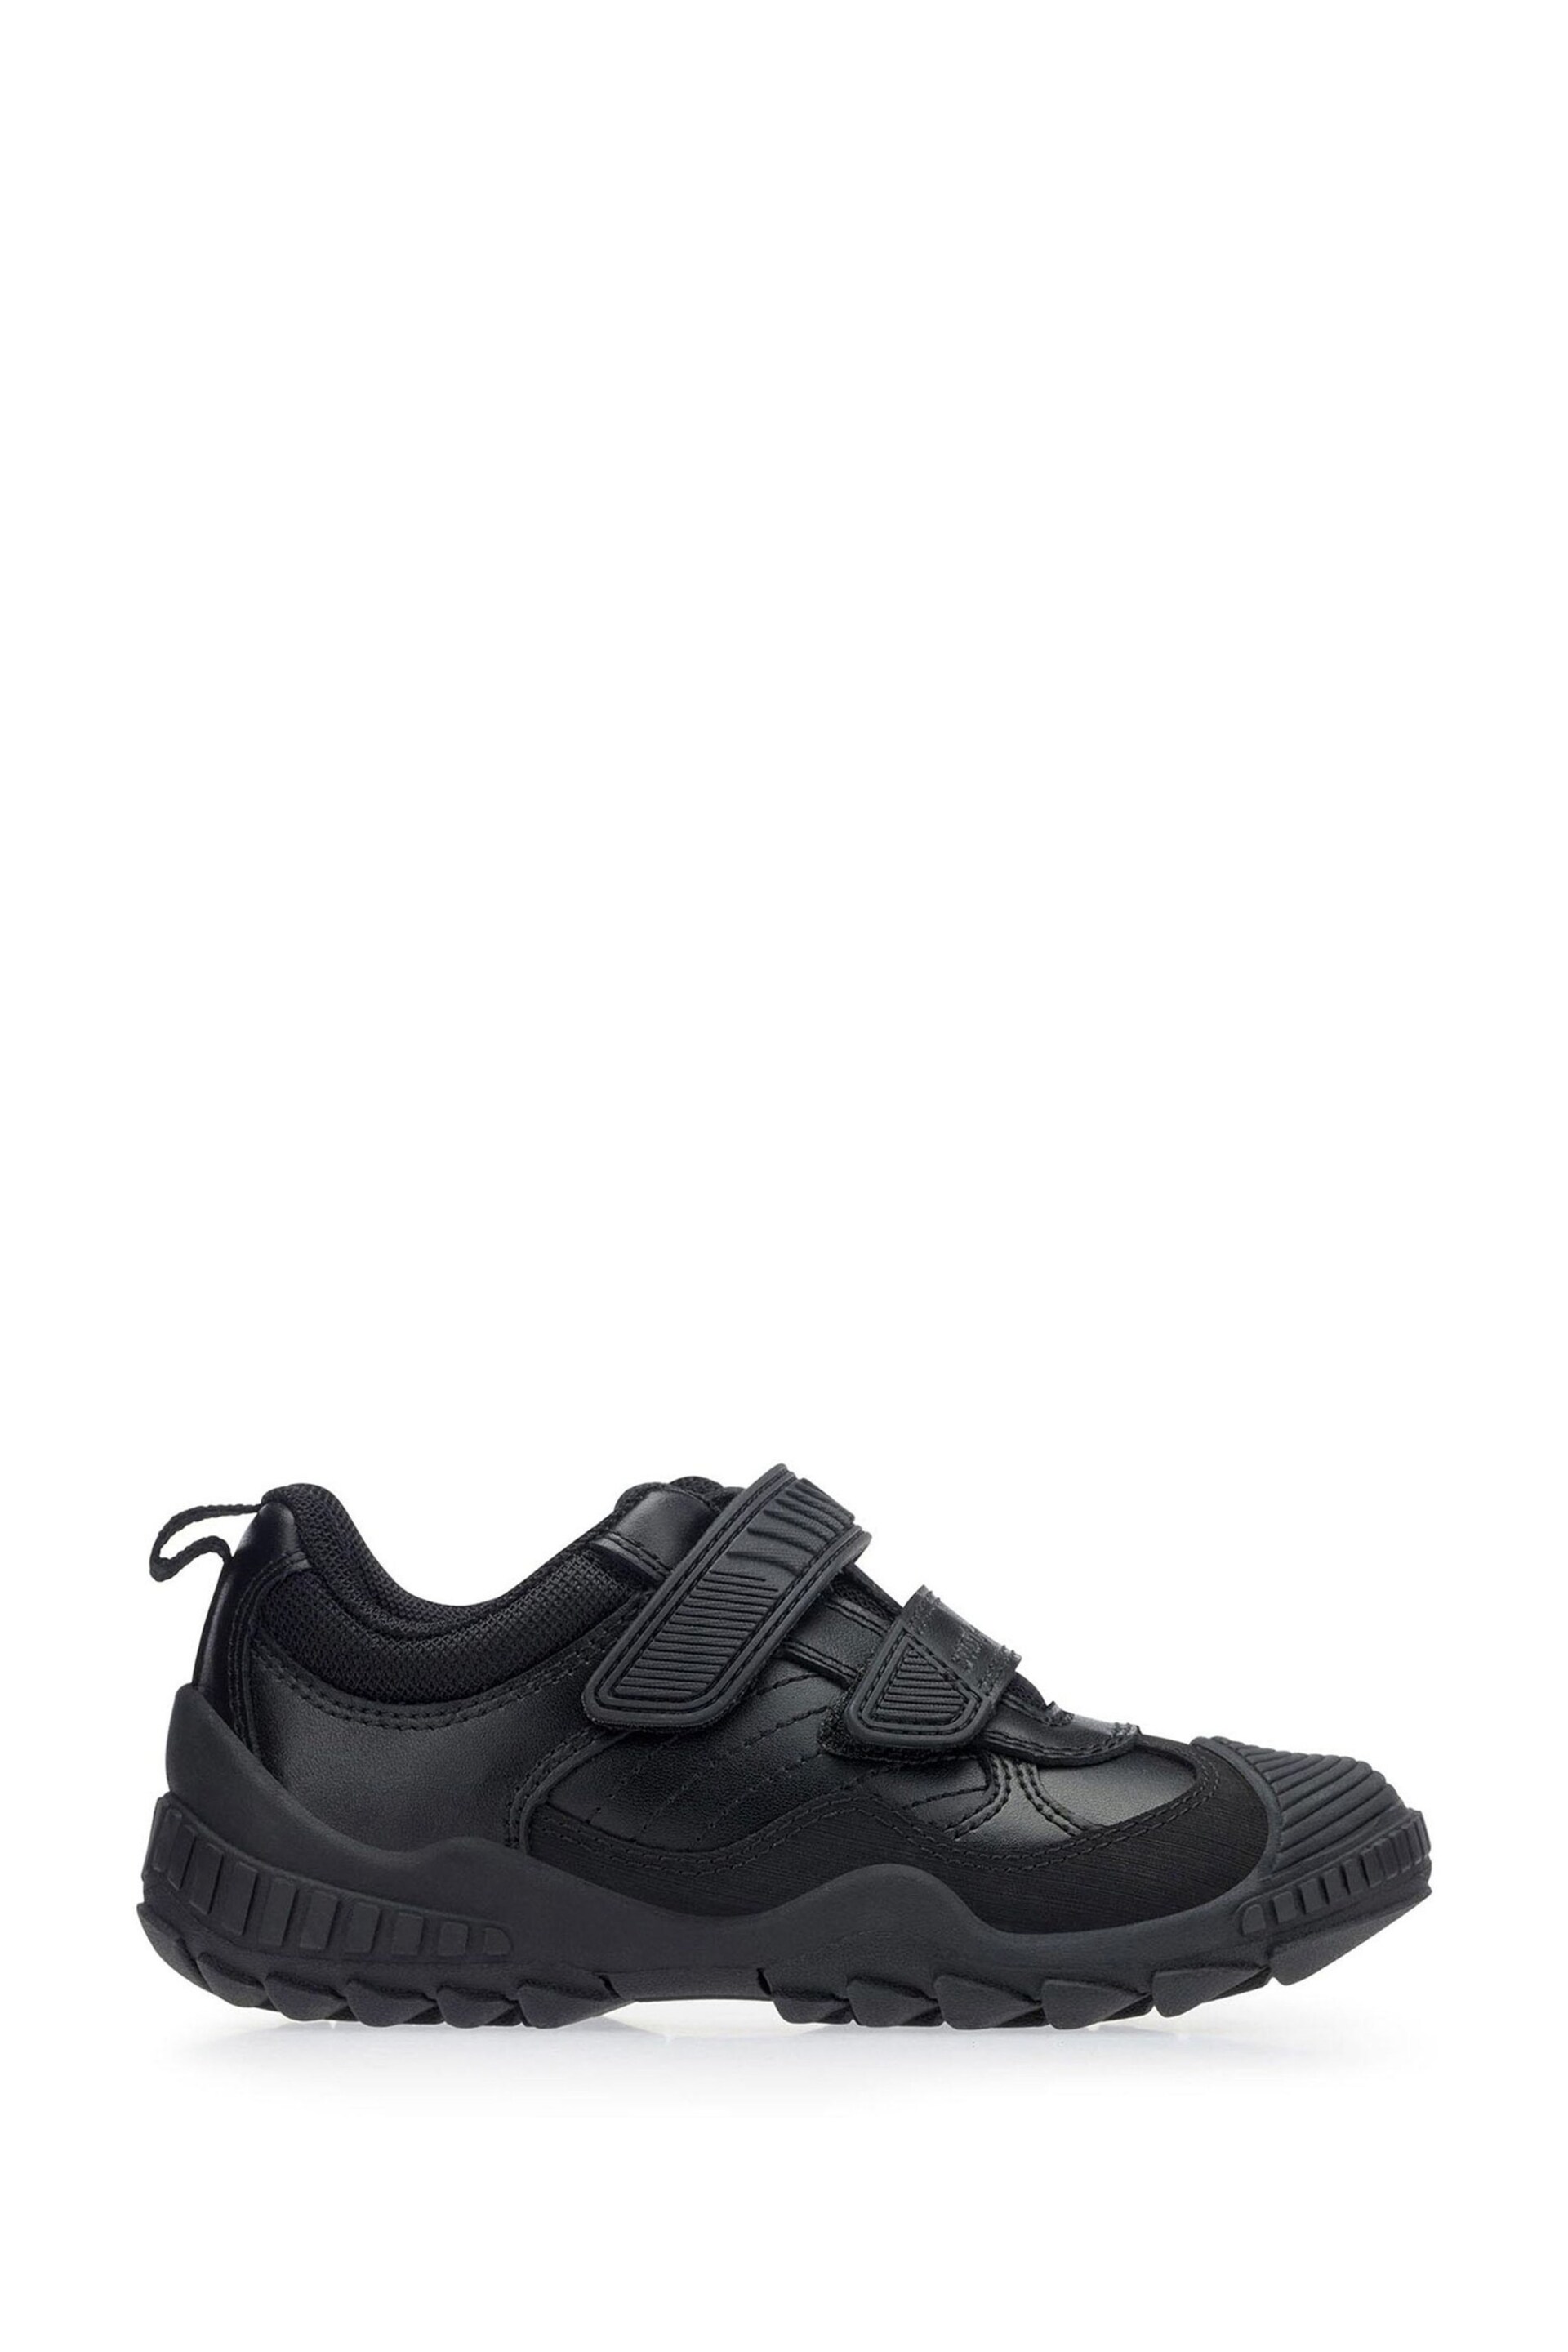 Start-Rite Extreme Pri Black Leather School Shoes G Fit - Image 1 of 6